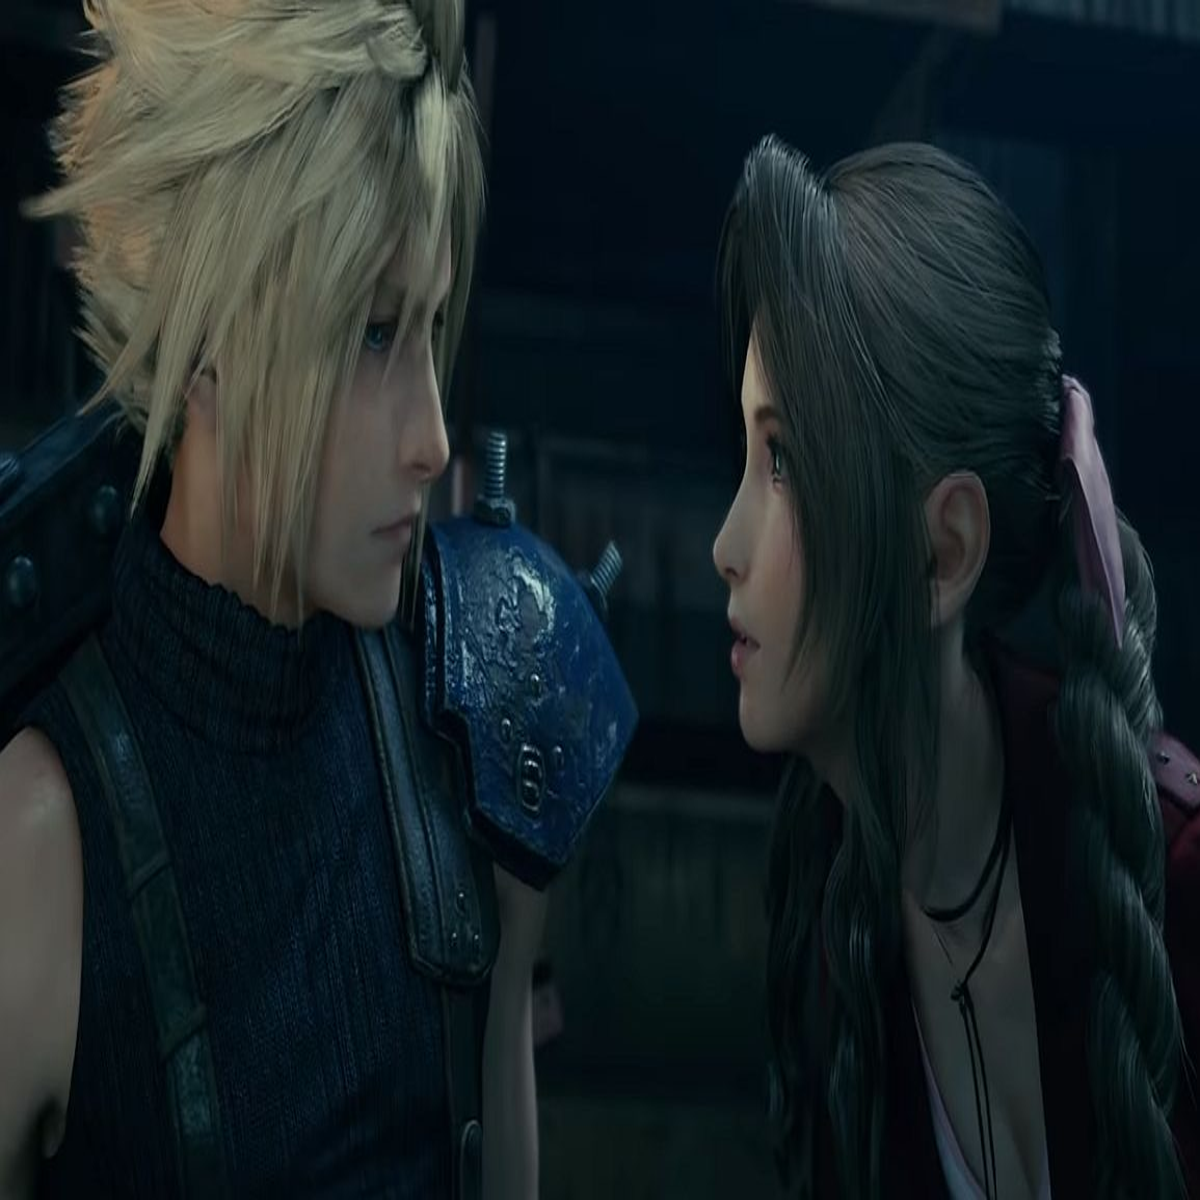 Final Fantasy 7 Remake's endgame content is disappointing